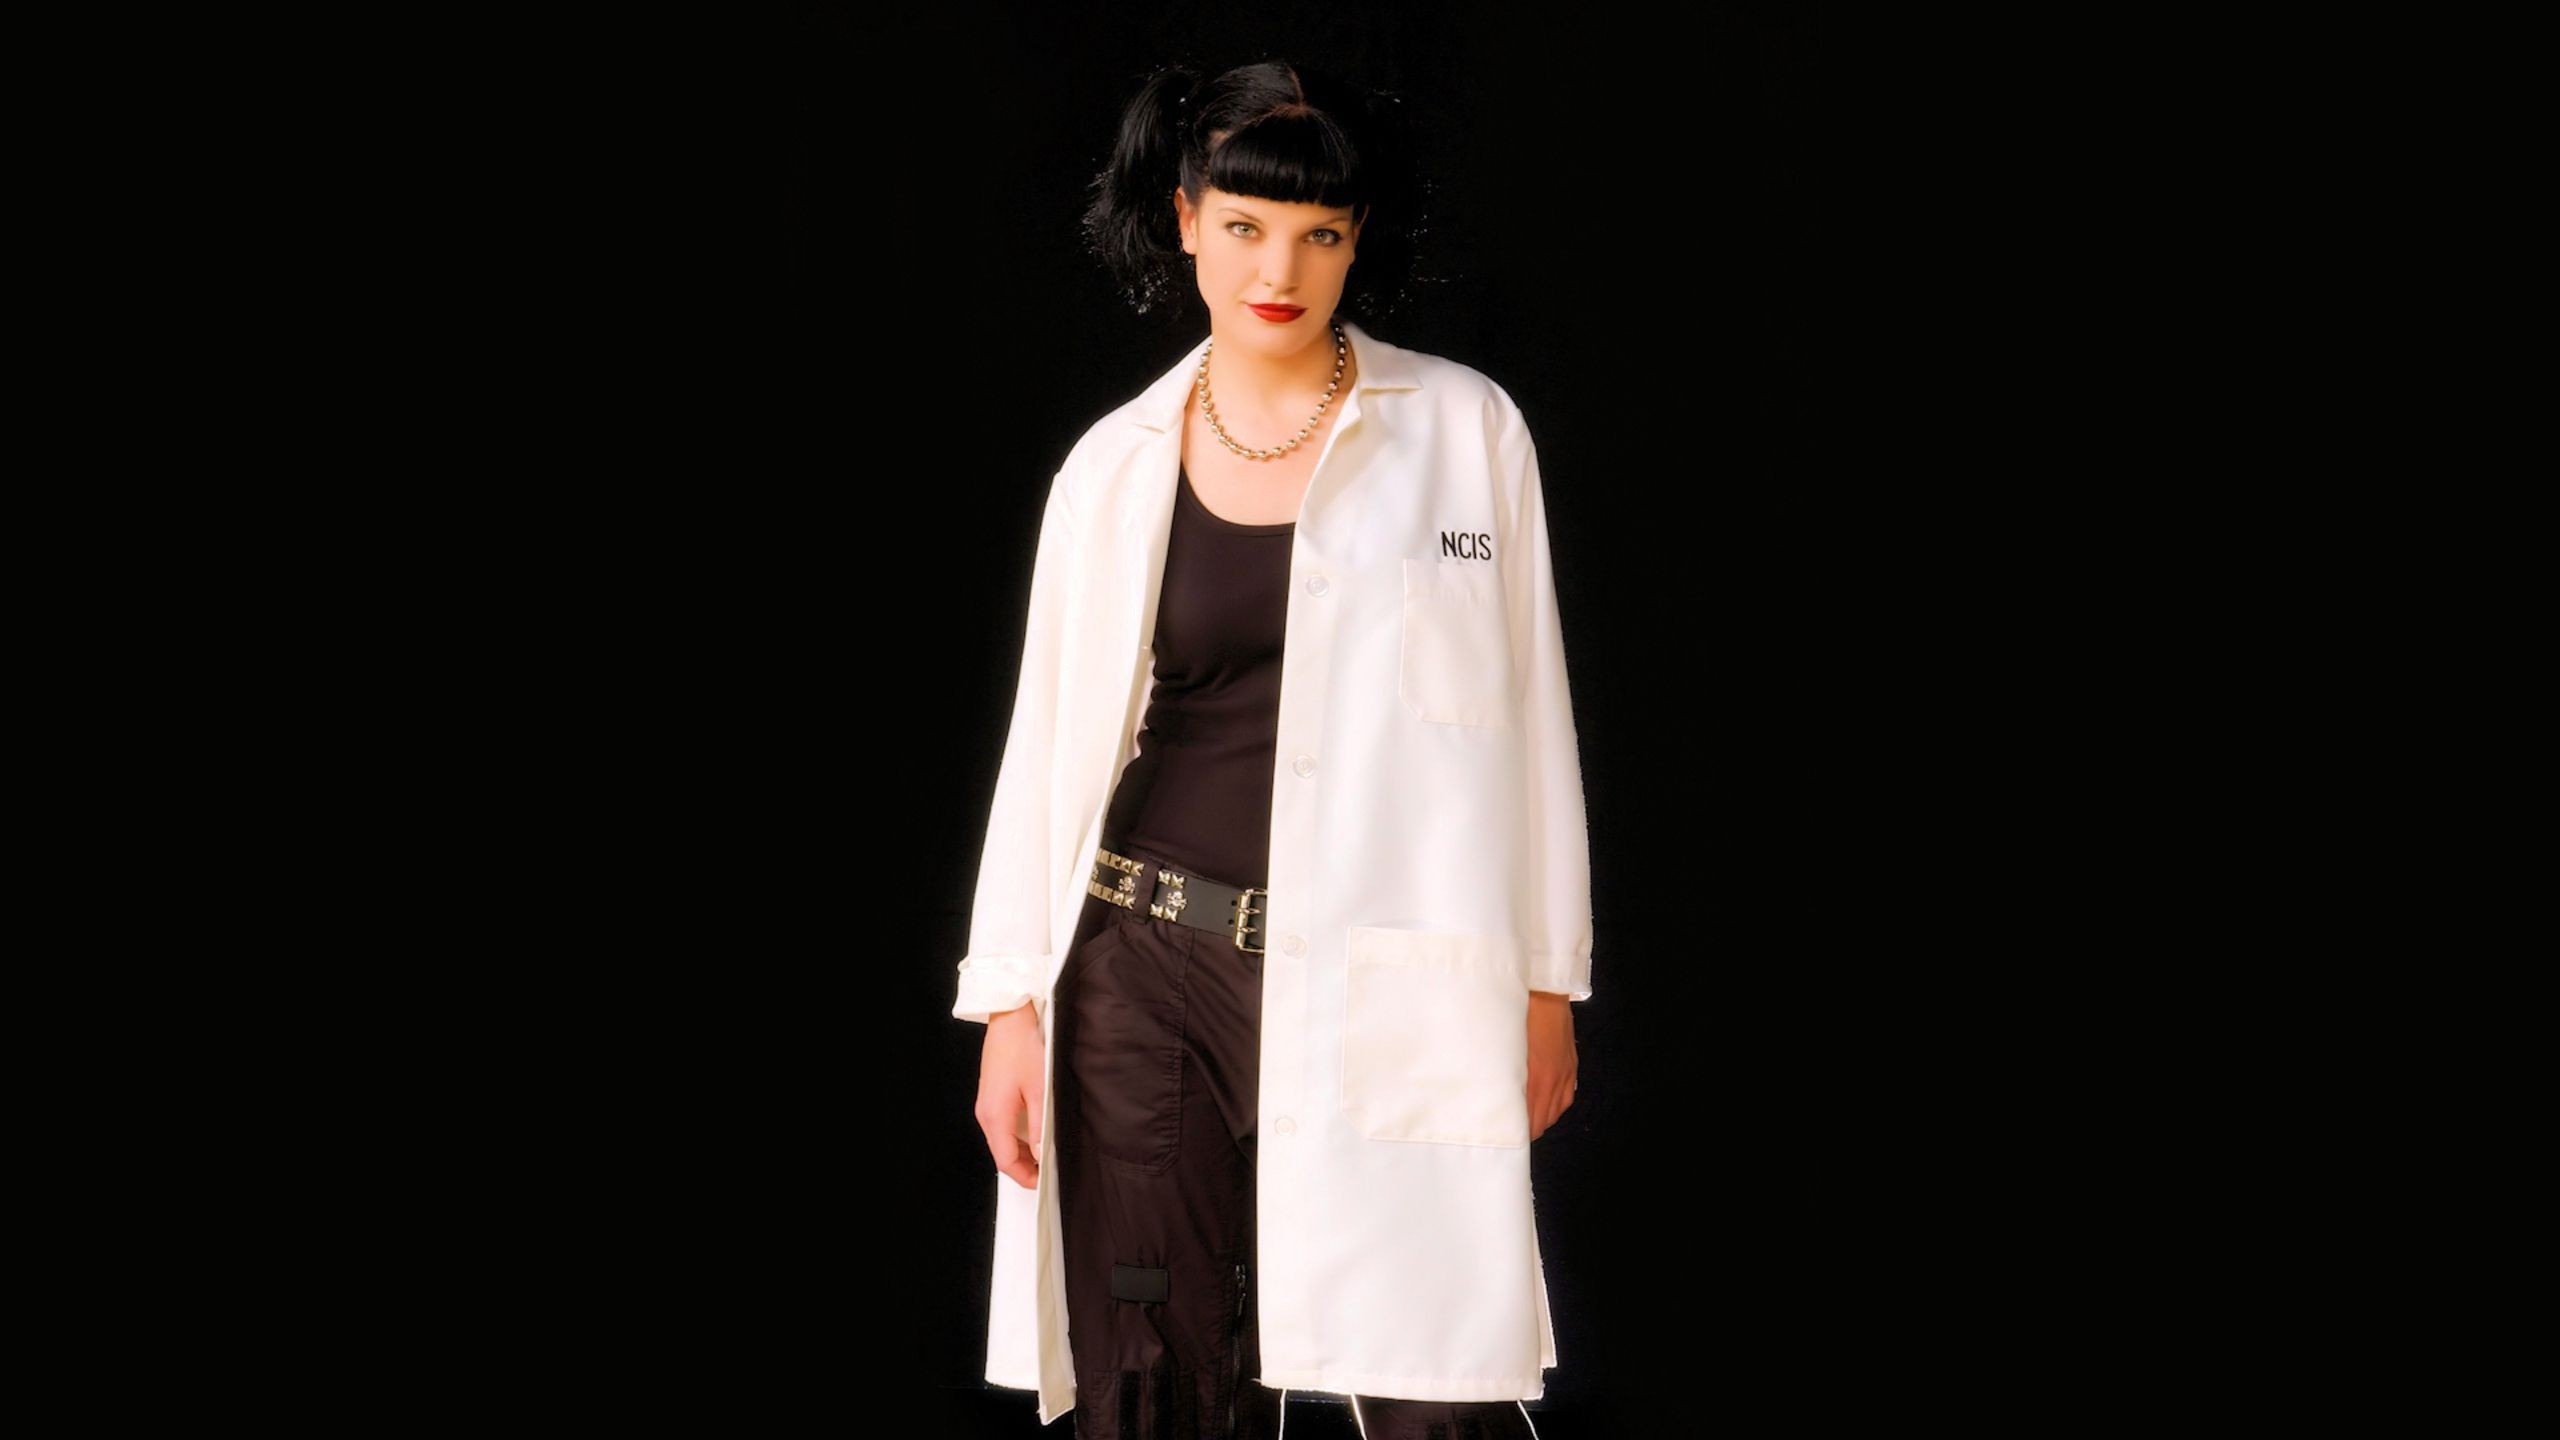 NCIS: Naval Criminal Investigative Service: Abigail "Abby" Beethoven Sciuto, A fictional character, CBS Television, Portrayed by Pauley Perrette. 2560x1440 HD Wallpaper.